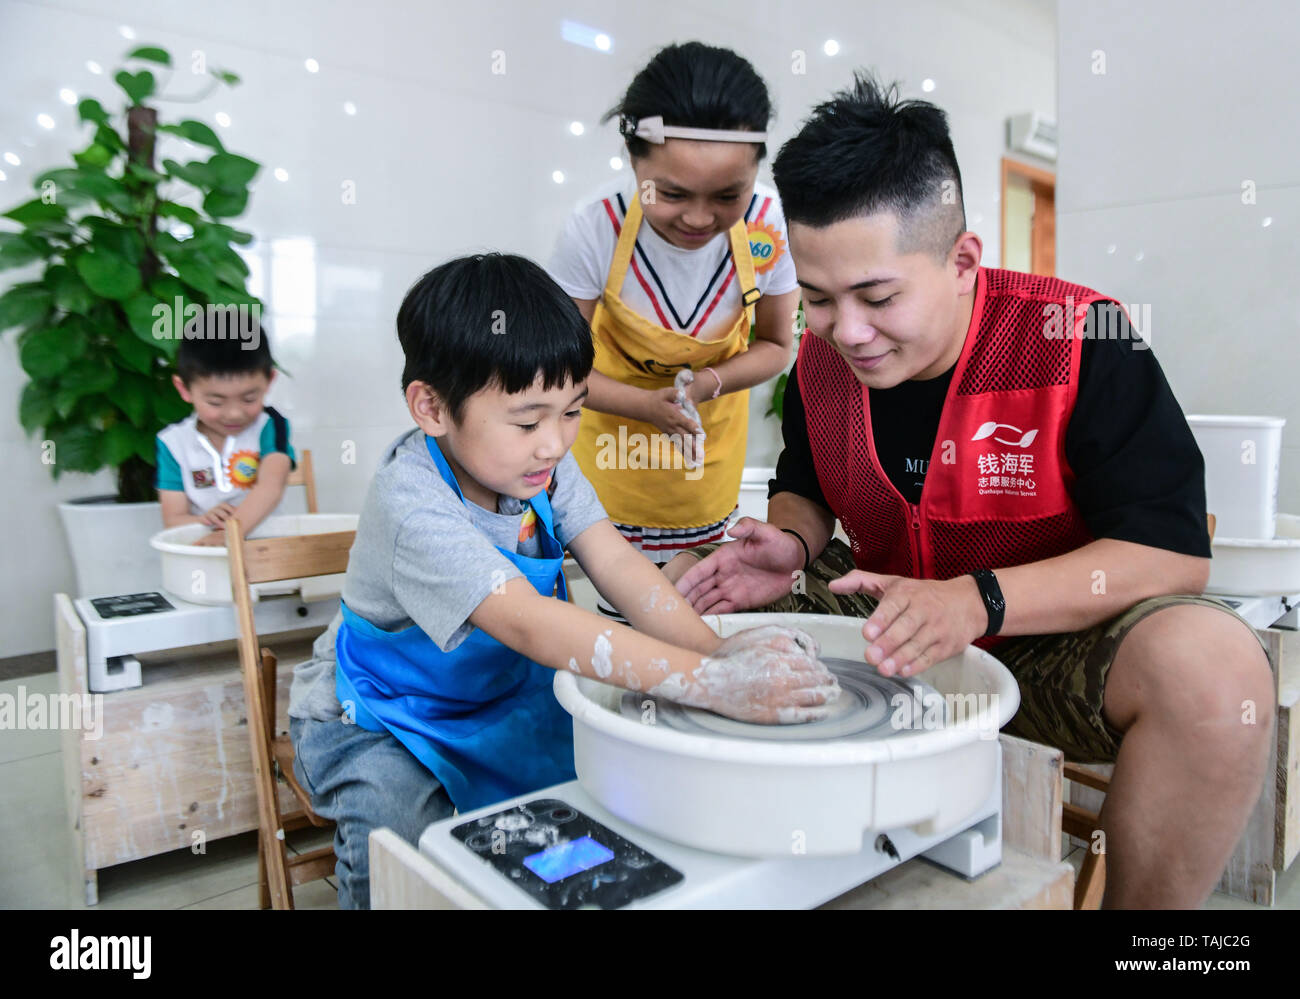 Cixi, China's Zhejiang Province. 25th May, 2019. Pupils make pottery wares under the instruction of a volunteer in Cixi City, east China's Zhejiang Province, May 25, 2019. A volunteer center in Cixi City opened a pottery class for local pupils in celebration of the upcoming International Children's Day. Credit: Xu Yu/Xinhua/Alamy Live News Stock Photo